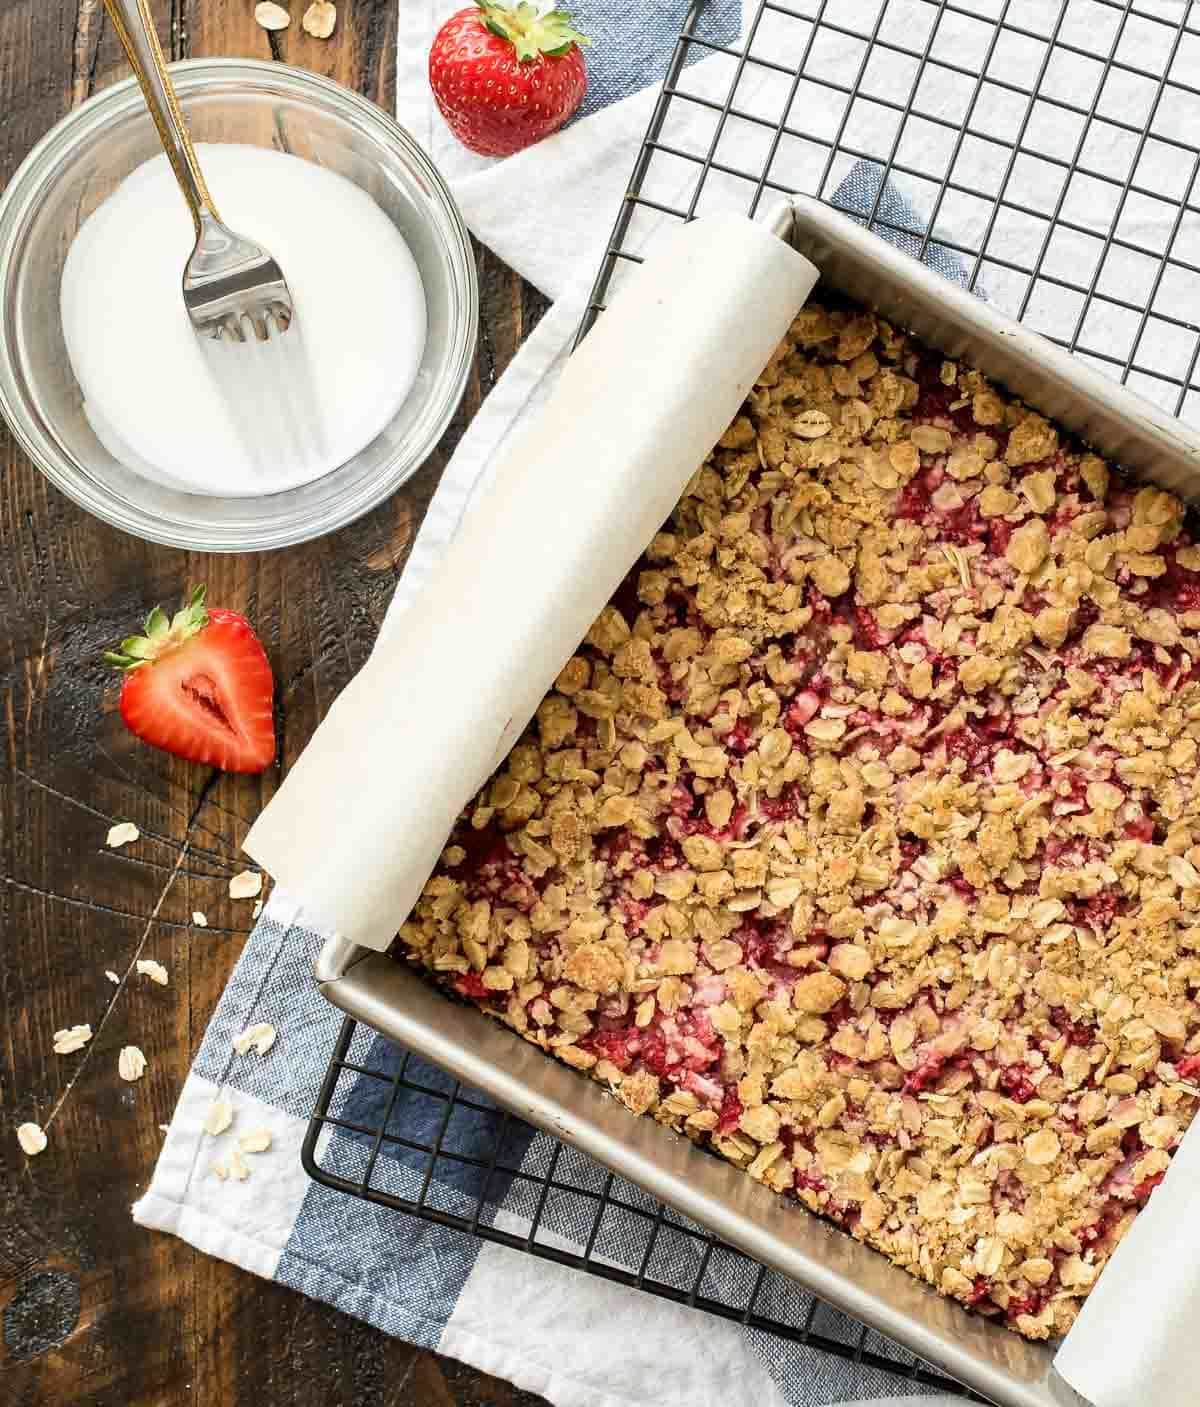 Strawberry Crumb Bars recipe — with a buttery crust, sweet fresh strawberry filling, butter crumb topping, and vanilla glaze, these bars have it all and are so easy! Made with 100% whole grain and the natural sweetness of strawberries, they are healthy enough for a snack but make a wonderful dessert bar for a party or picnic too! @wellplated